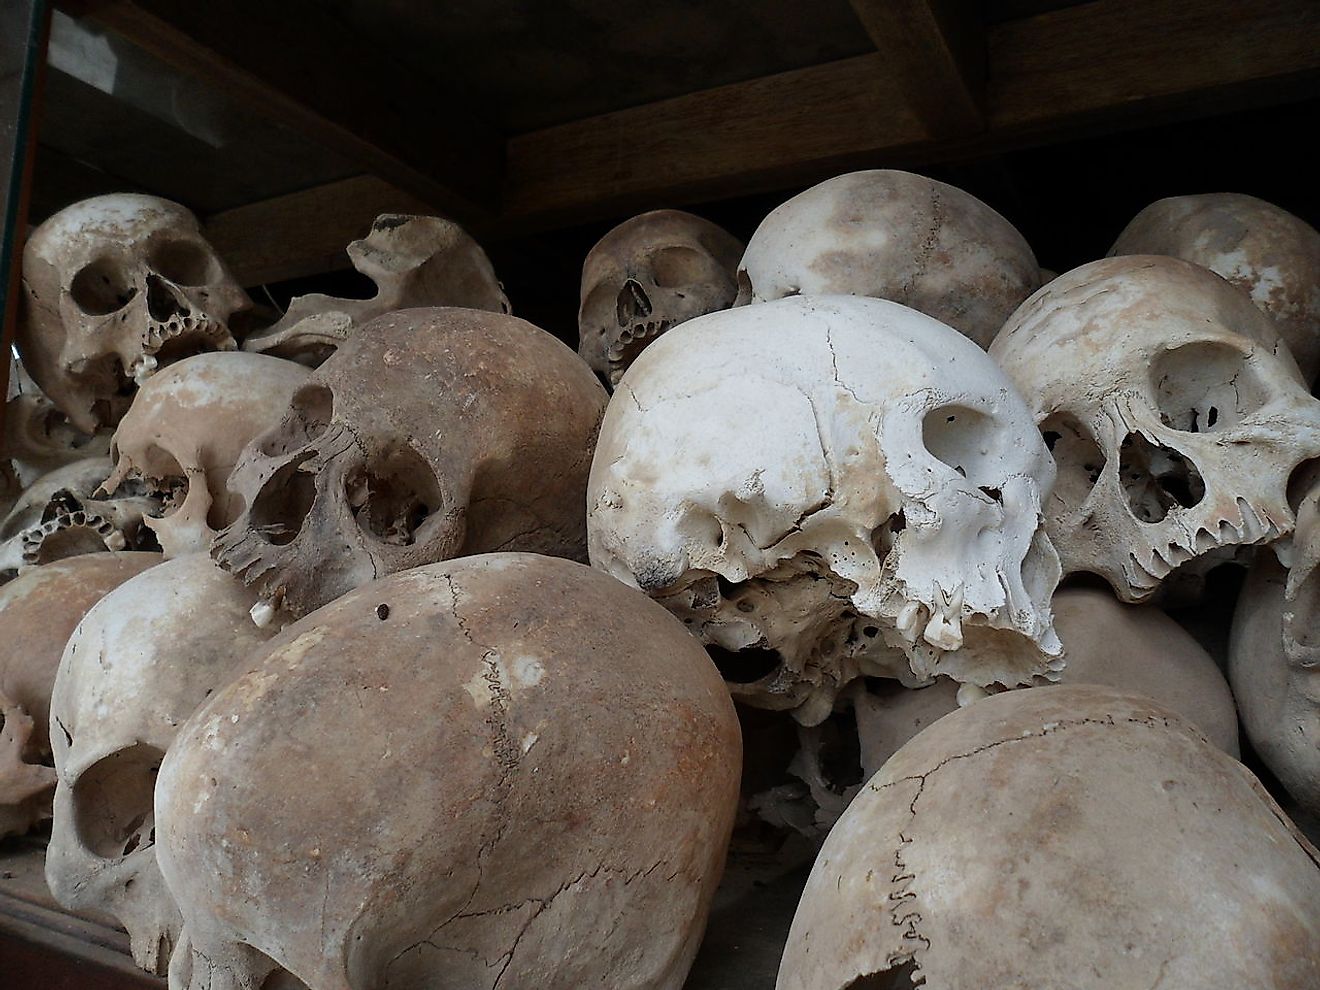 Skulls of victims of the Cambodian genocide. Image credit: Sigmankatie/Wikimedia.org